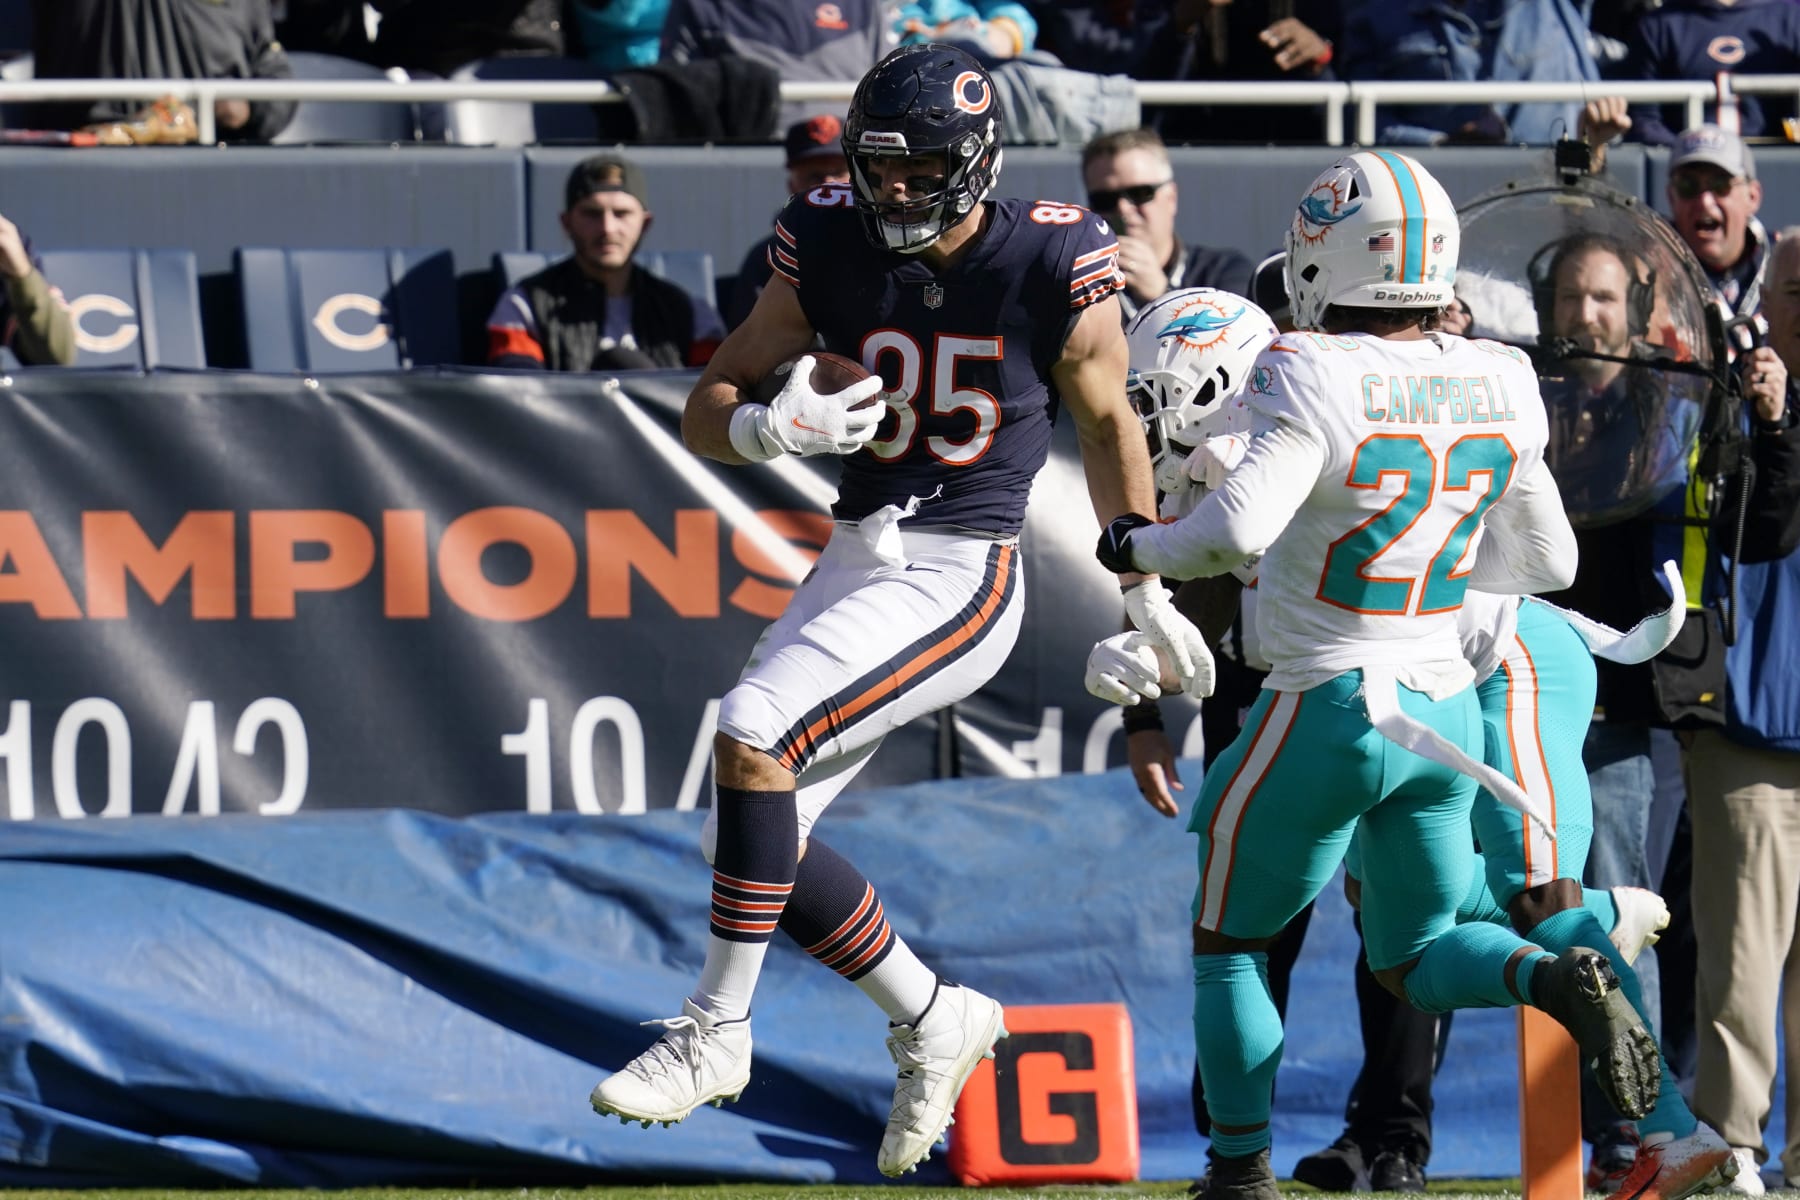 NFL Week 9 Game Recap: Miami Dolphins 35, Chicago Bears 32, NFL News,  Rankings and Statistics